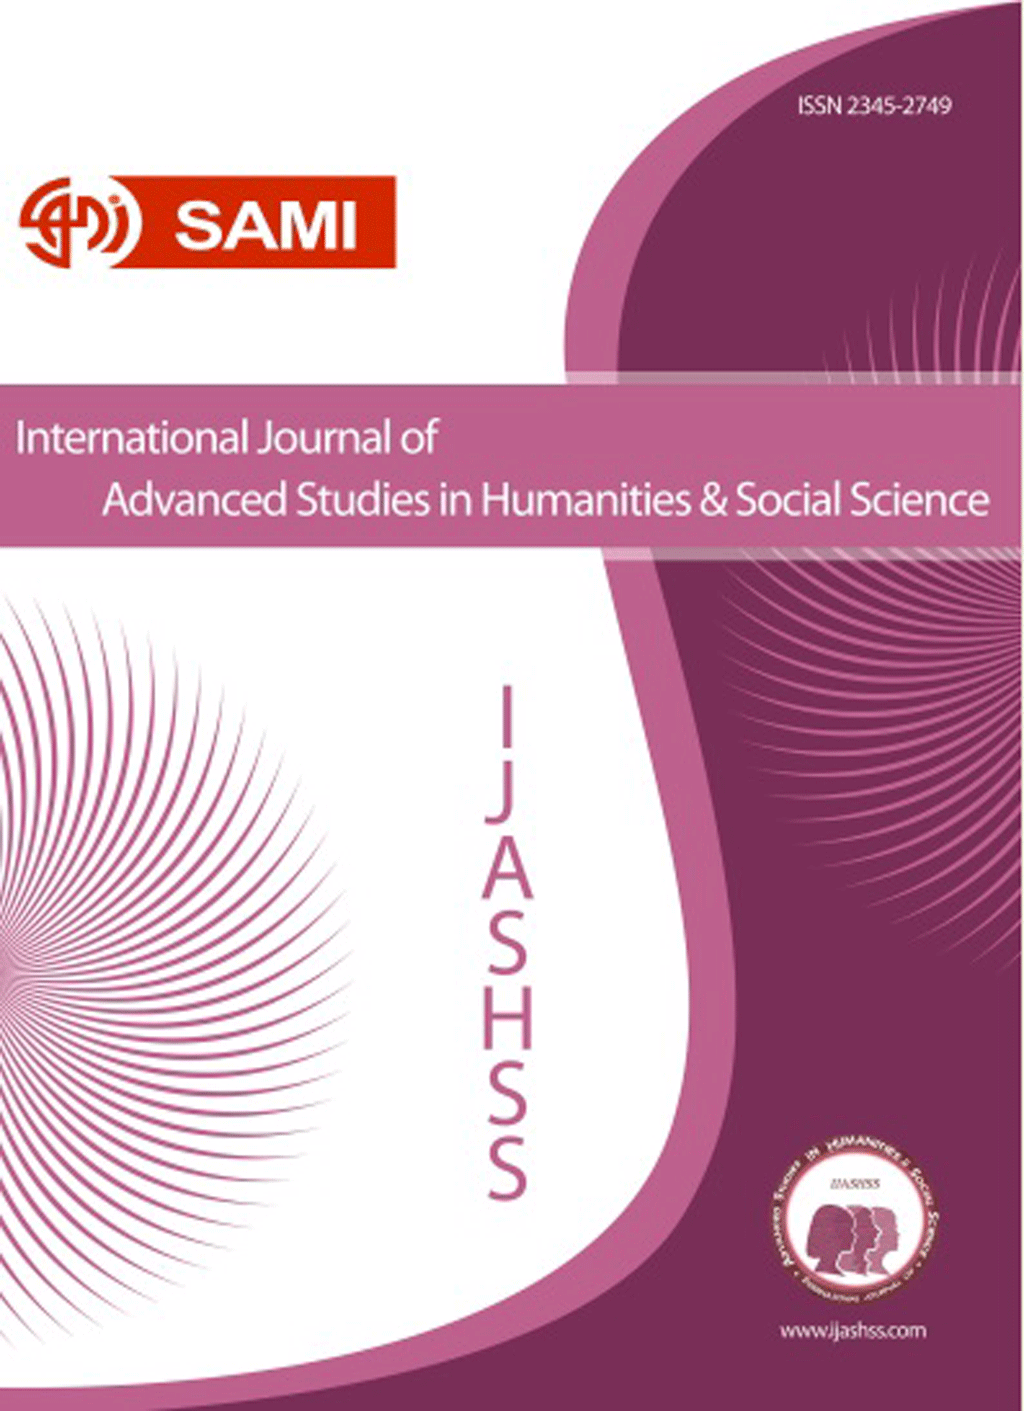 International Journal of Advanced Studies in Humanities and Social Science - April 2018, Volume 7 - Issue 2